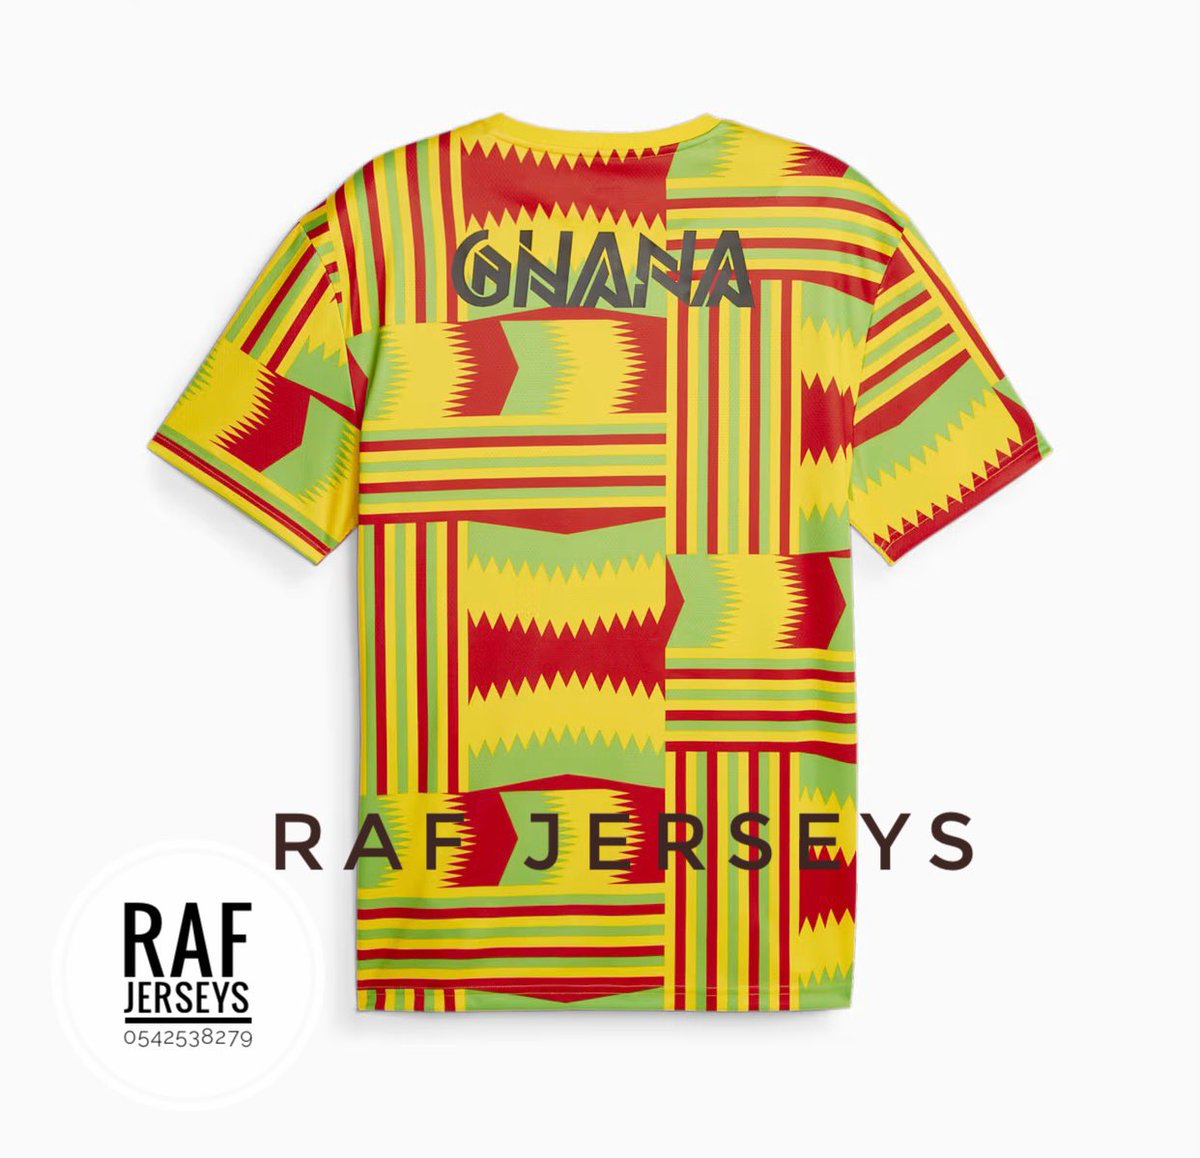 Ghana Fanwear Kit available 

GHc150

Nationwide delivery at a cost

Please repost